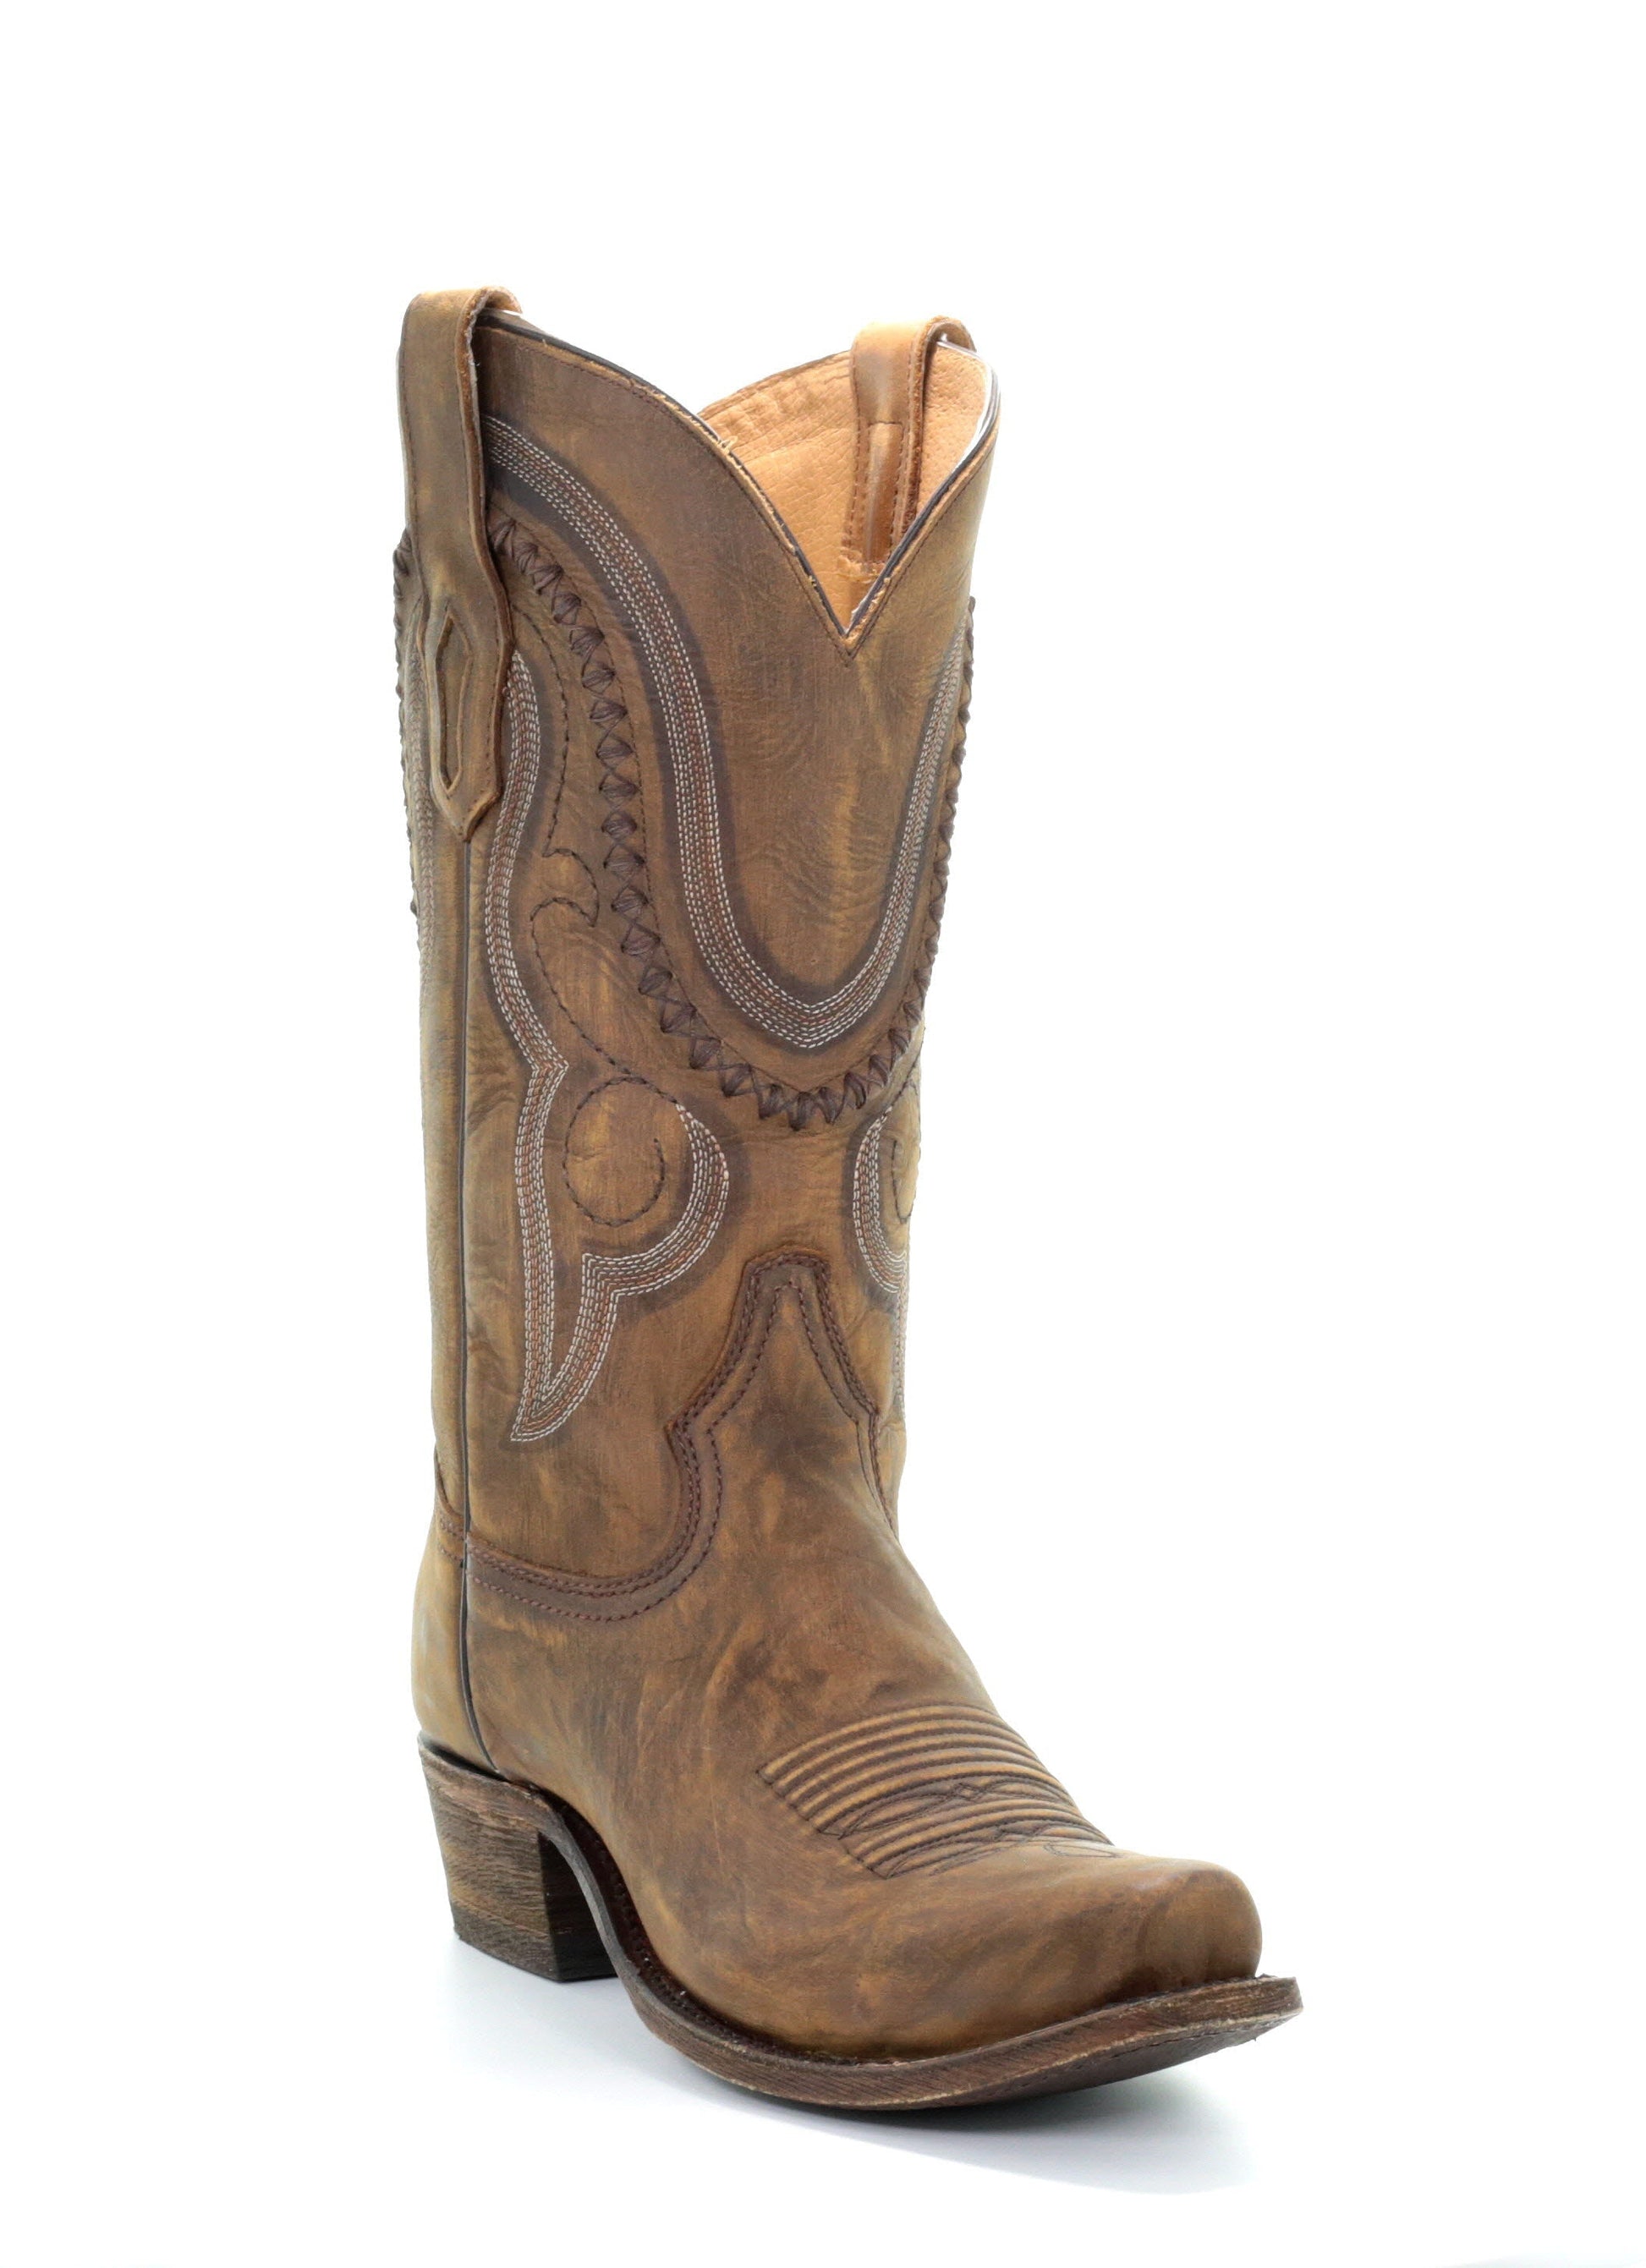 A3479 - Corral gold western cowboy leather boots for men-Kuet.us